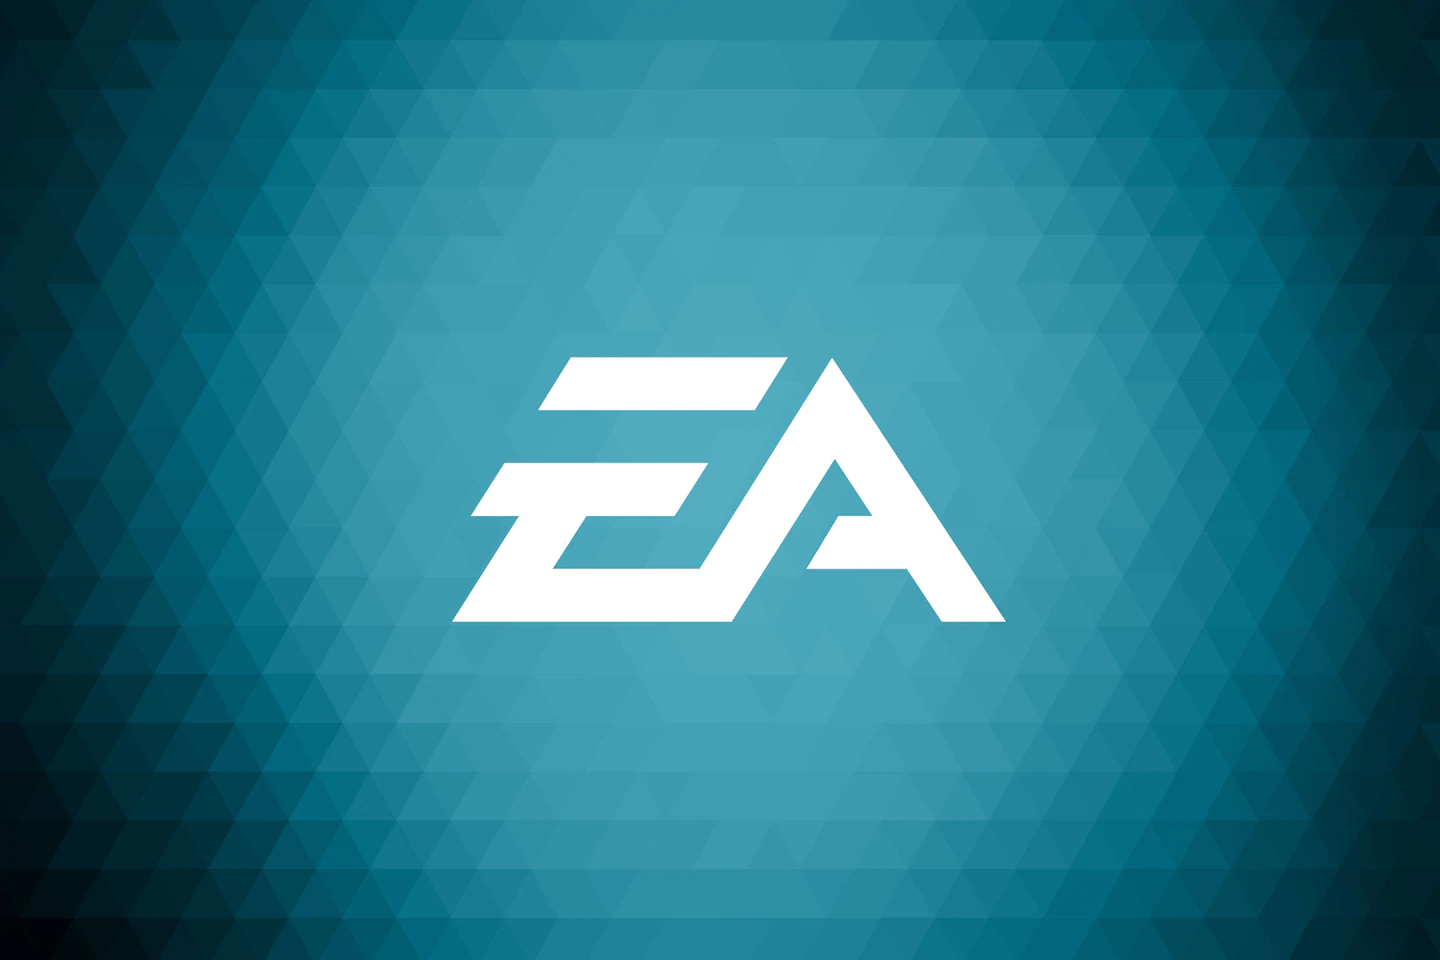 EA Play 2020: ‘Apex Legends’ cross play, ‘Star Wars: Squadrons’ gameplay, new ‘Skate’ coming